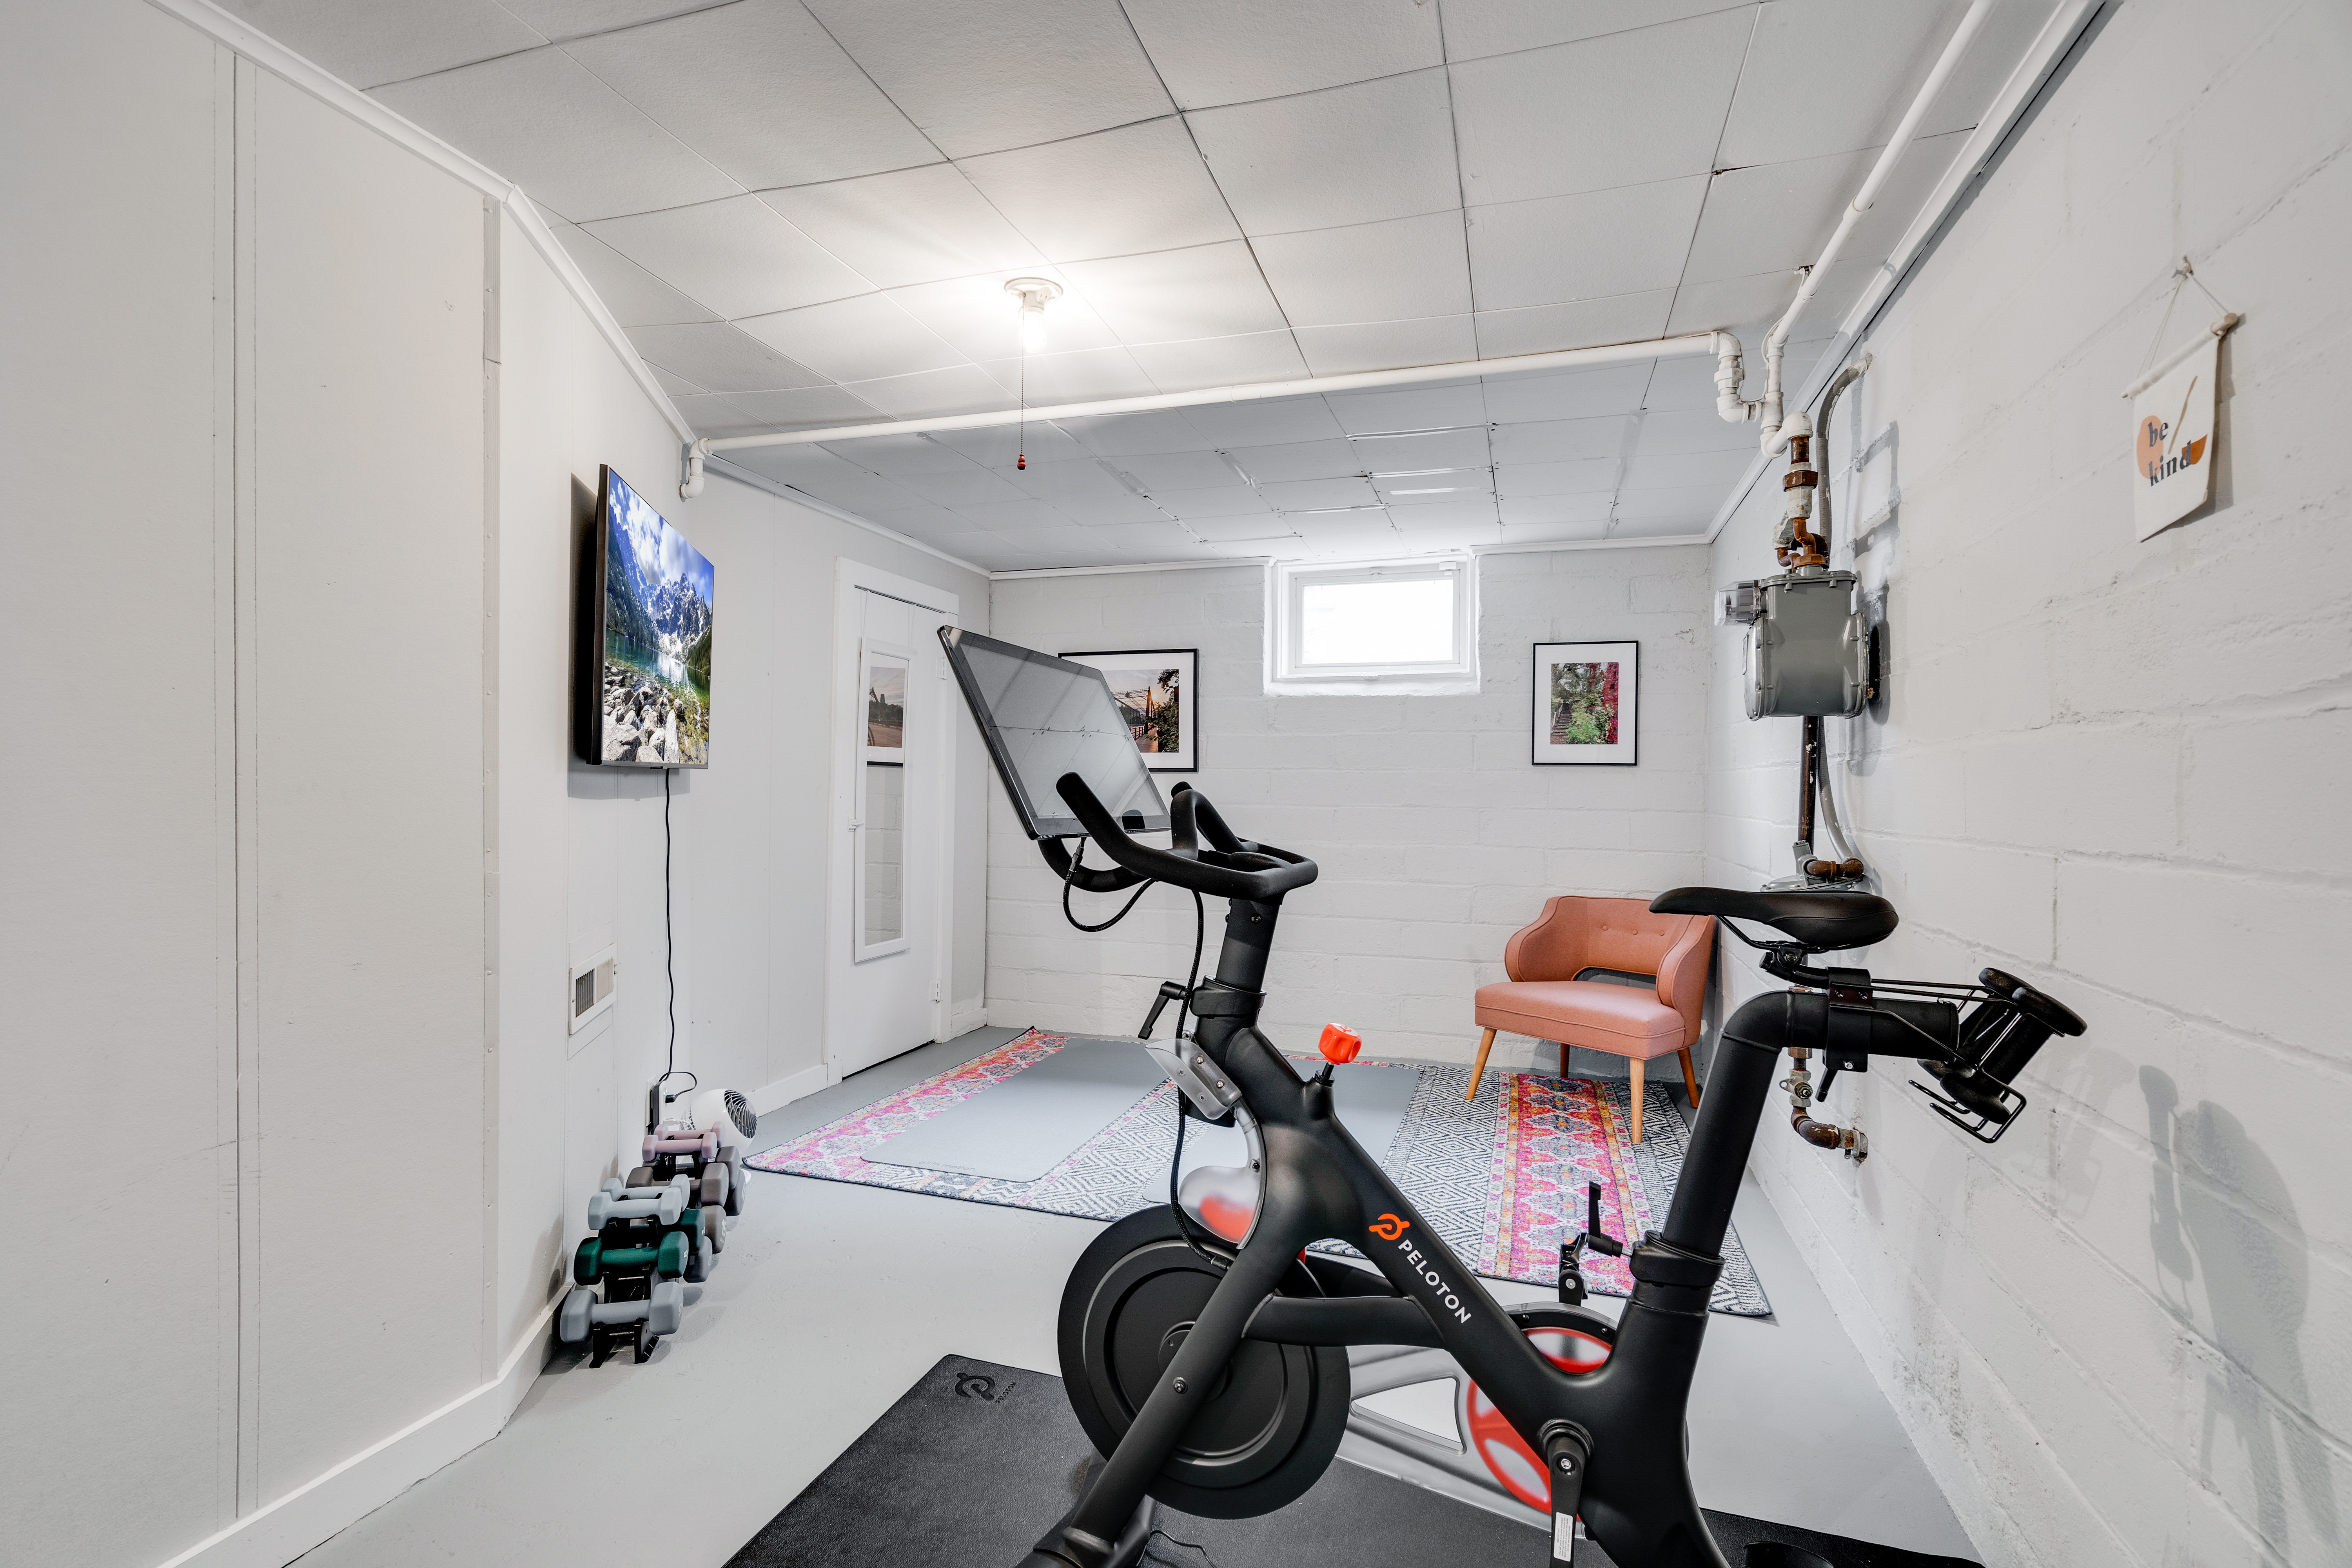 Personal workout space with Peloton Bike, free weights, yoga mat, and Samsung TV